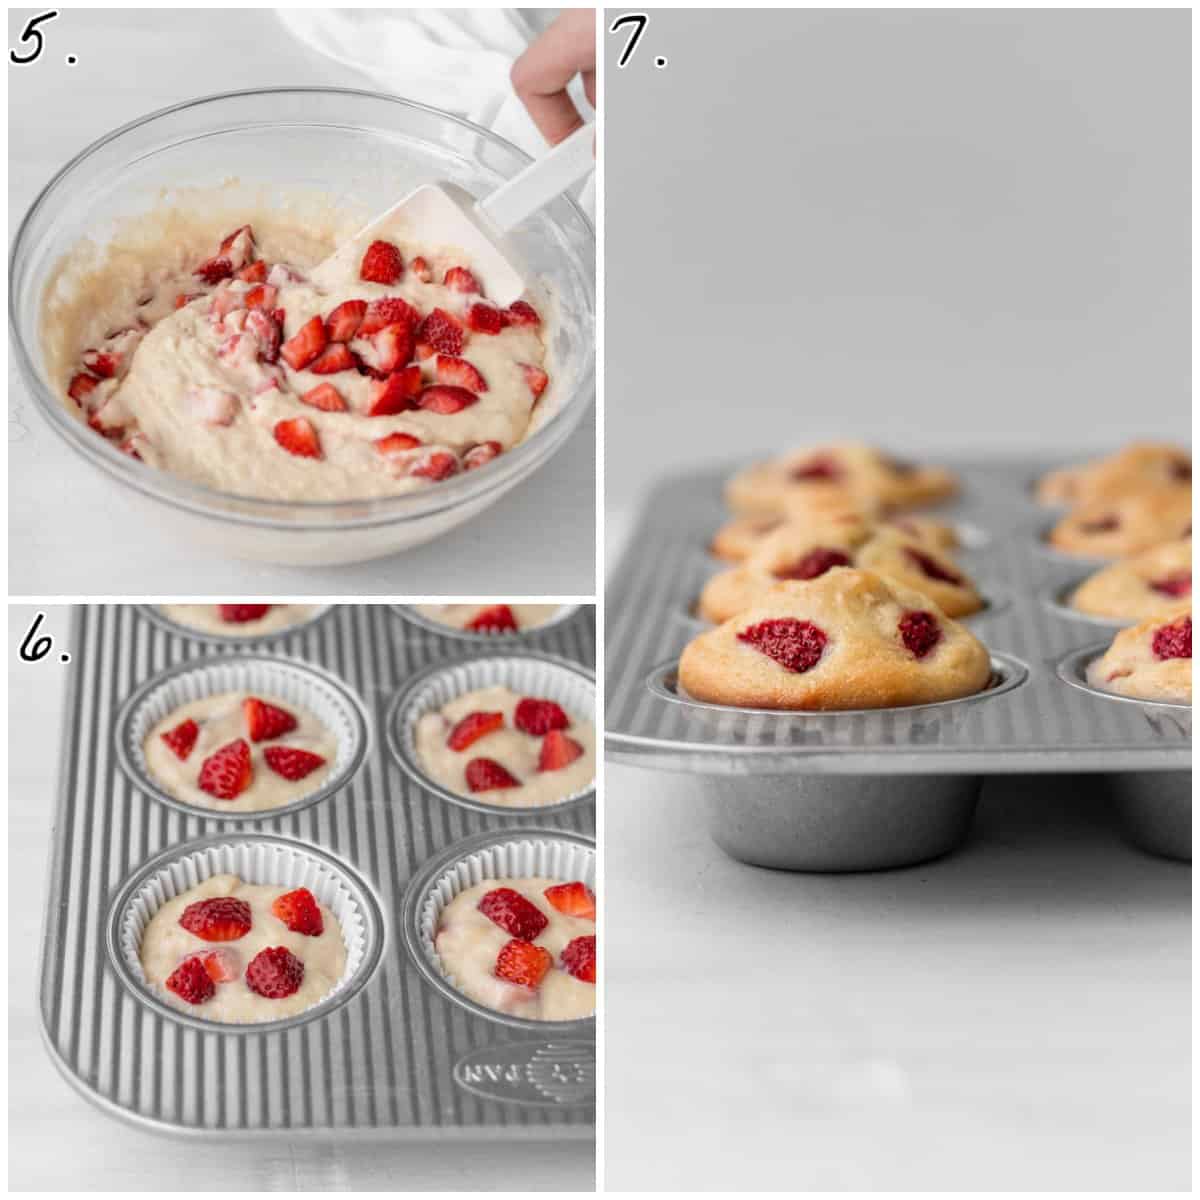 Three process photos showing wet batter in bowl, batter in muffin tins, and fully baked muffins in tin.